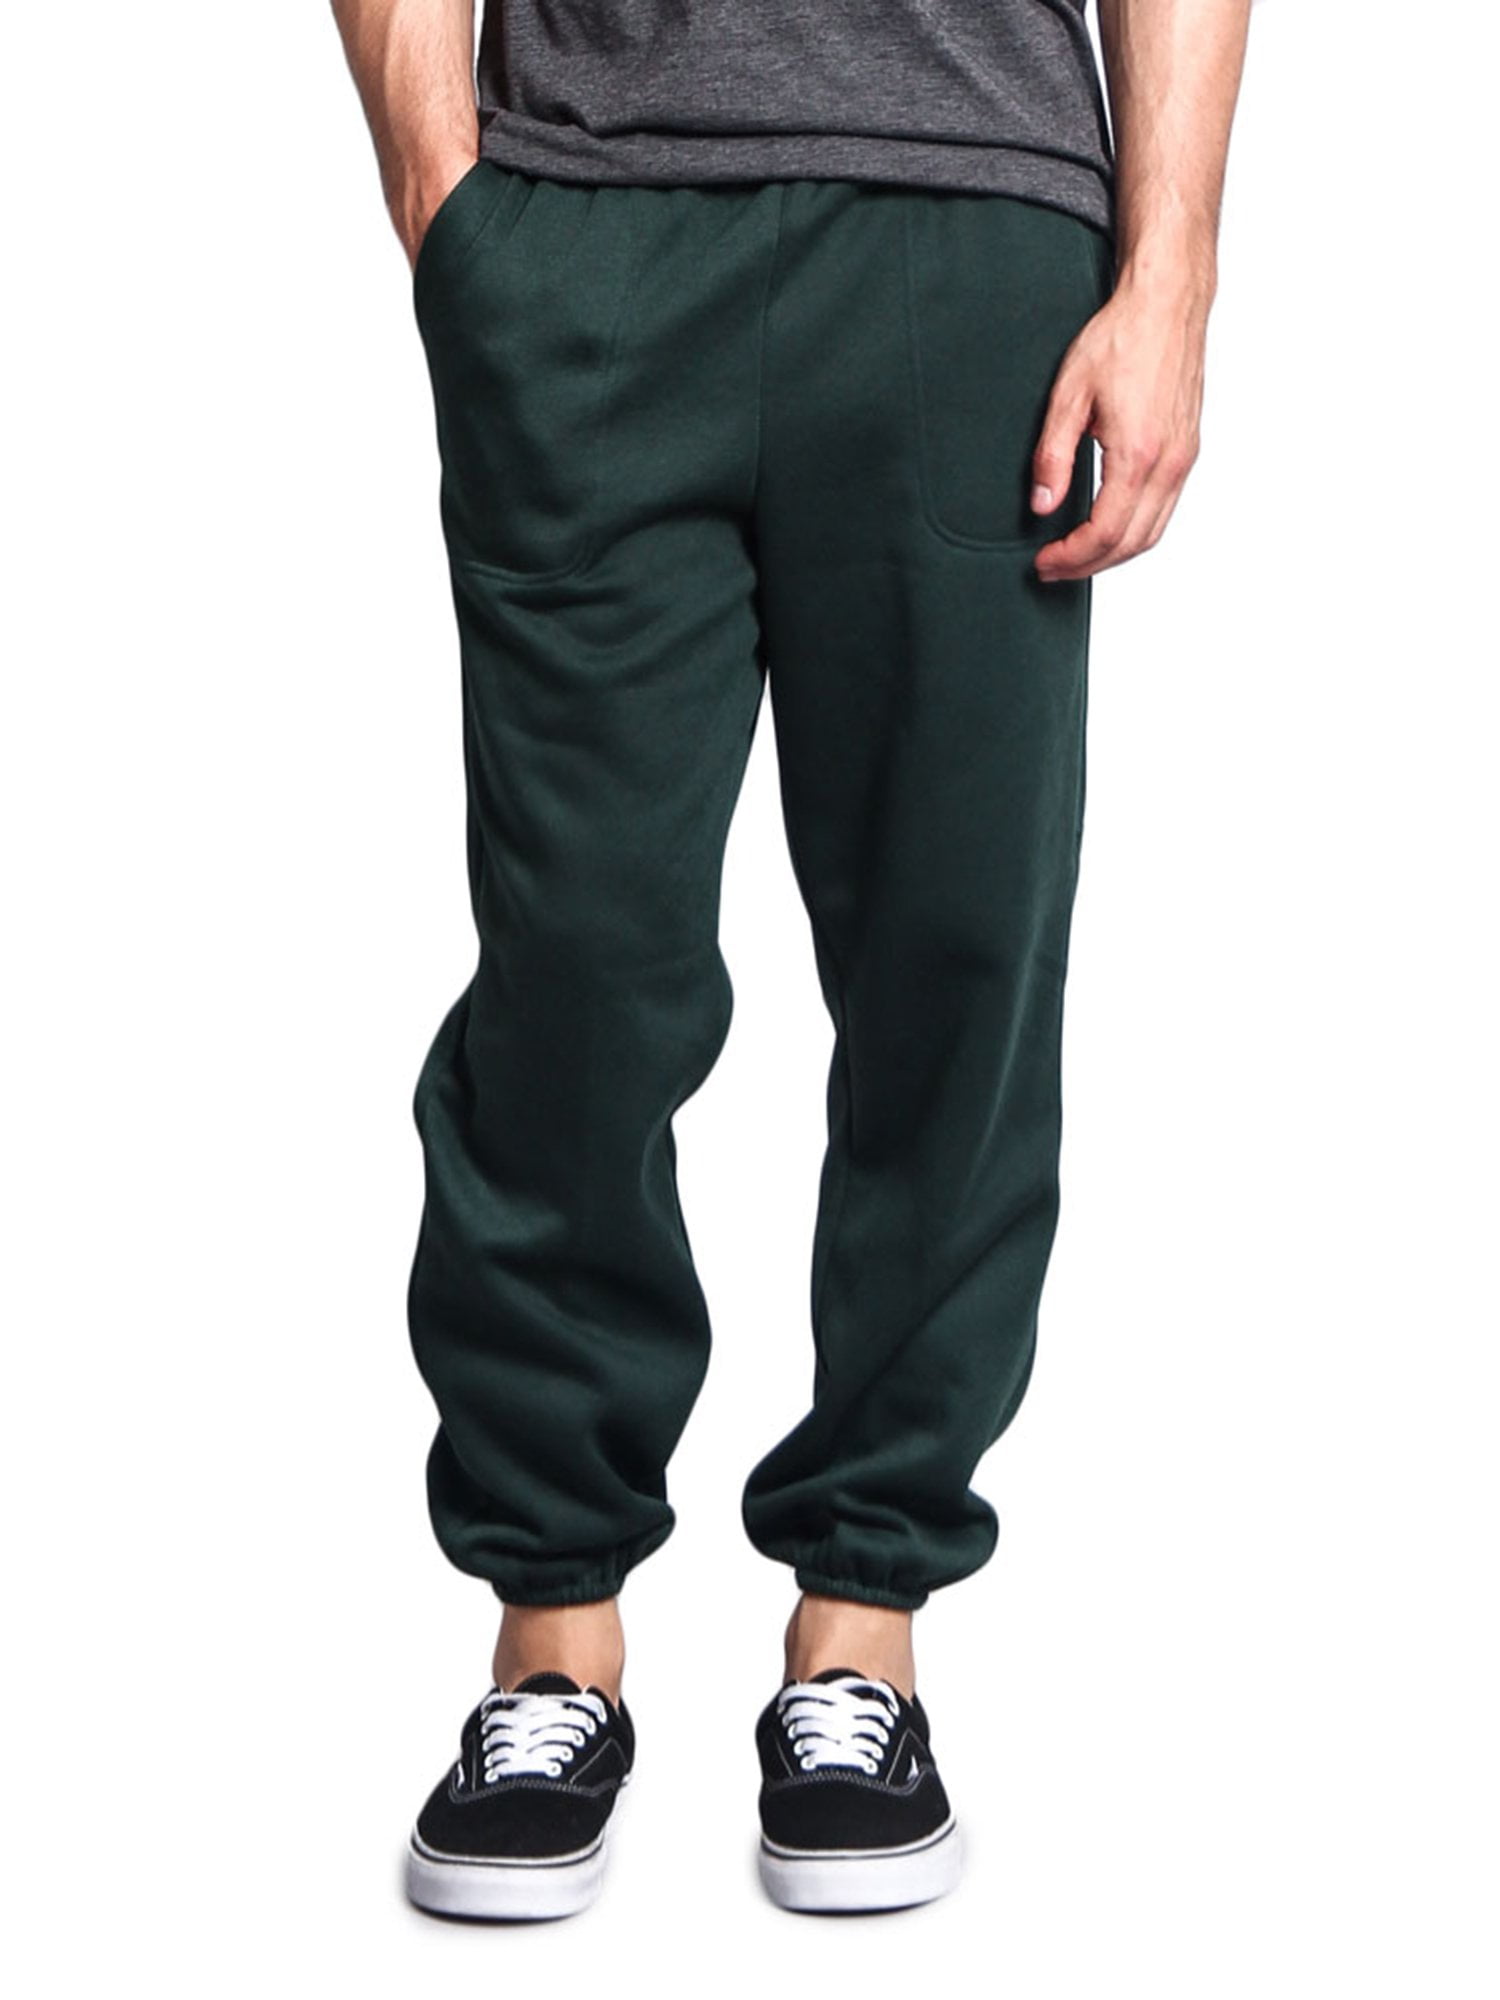 G-Style USA Men's Basic Fleece Jogger Sweatpants with Pockets, Up to 5X ...